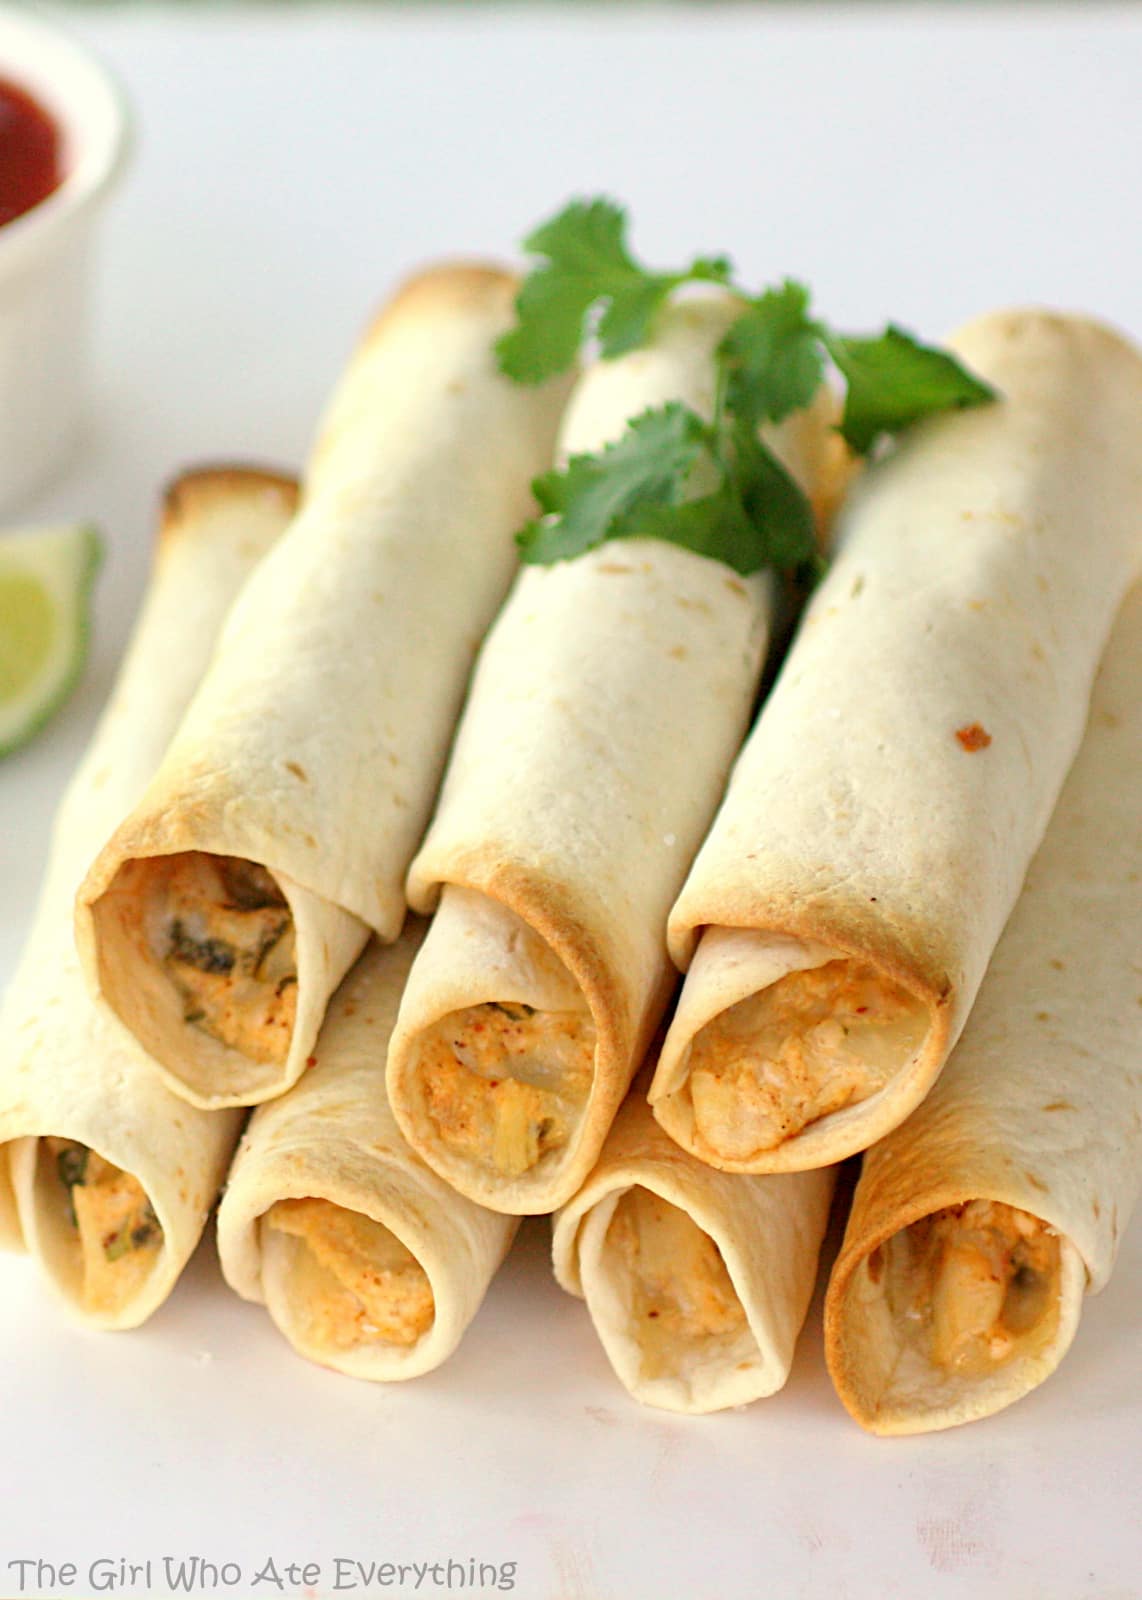 Baked Creamy Chicken Taquitos - one of my favorite go-to Mexican appetizers or meal. the-girl-who-ate-everything.com